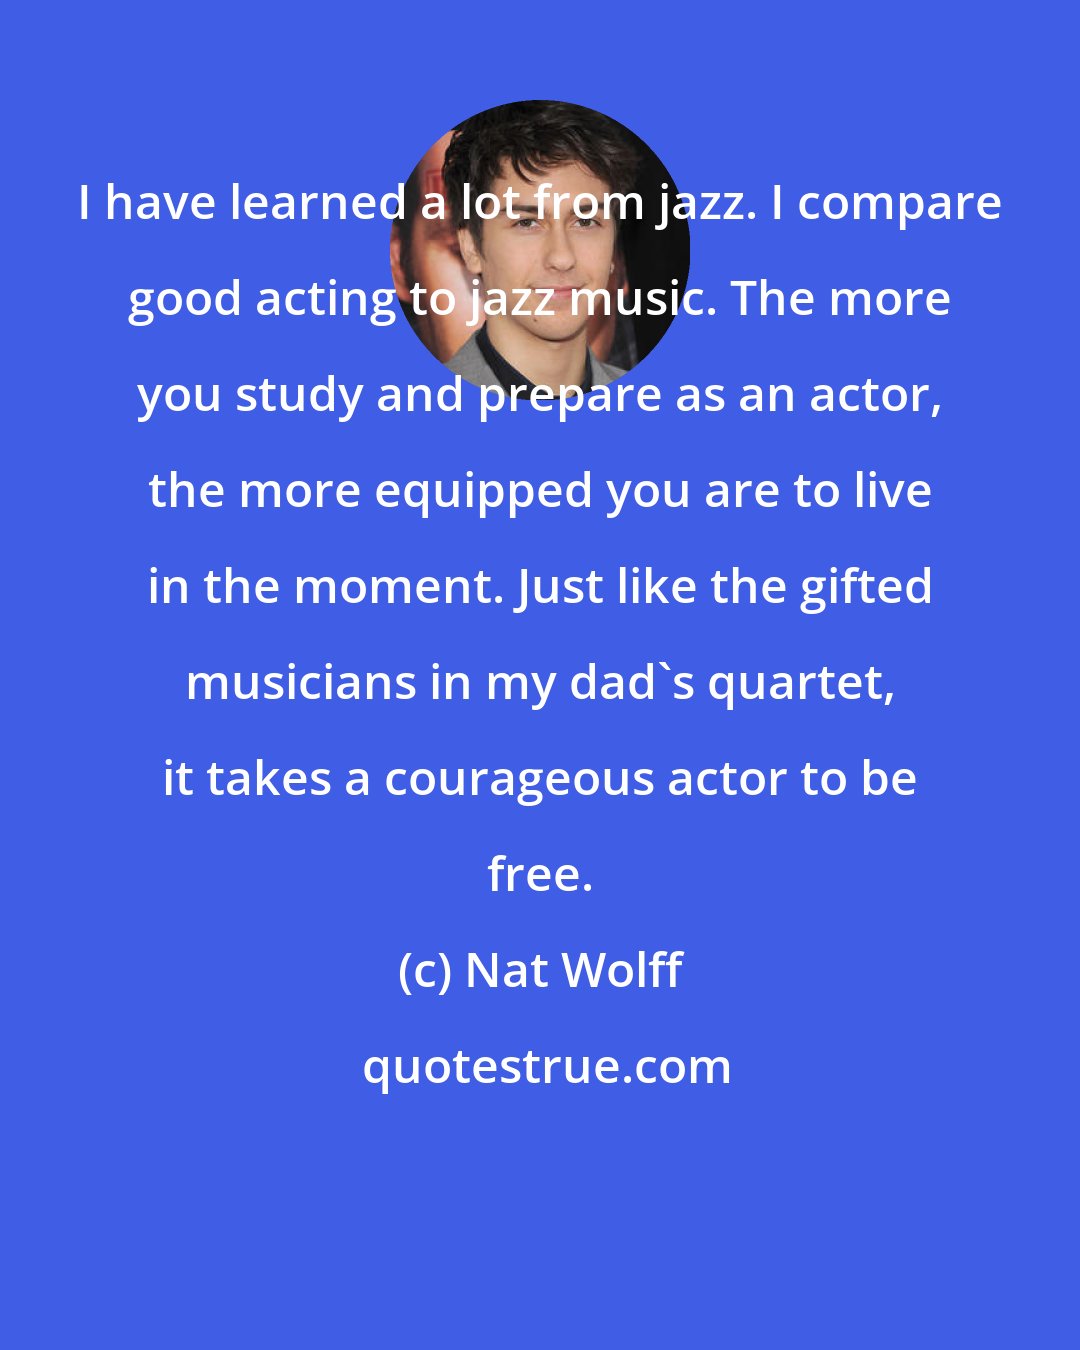 Nat Wolff: I have learned a lot from jazz. I compare good acting to jazz music. The more you study and prepare as an actor, the more equipped you are to live in the moment. Just like the gifted musicians in my dad's quartet, it takes a courageous actor to be free.